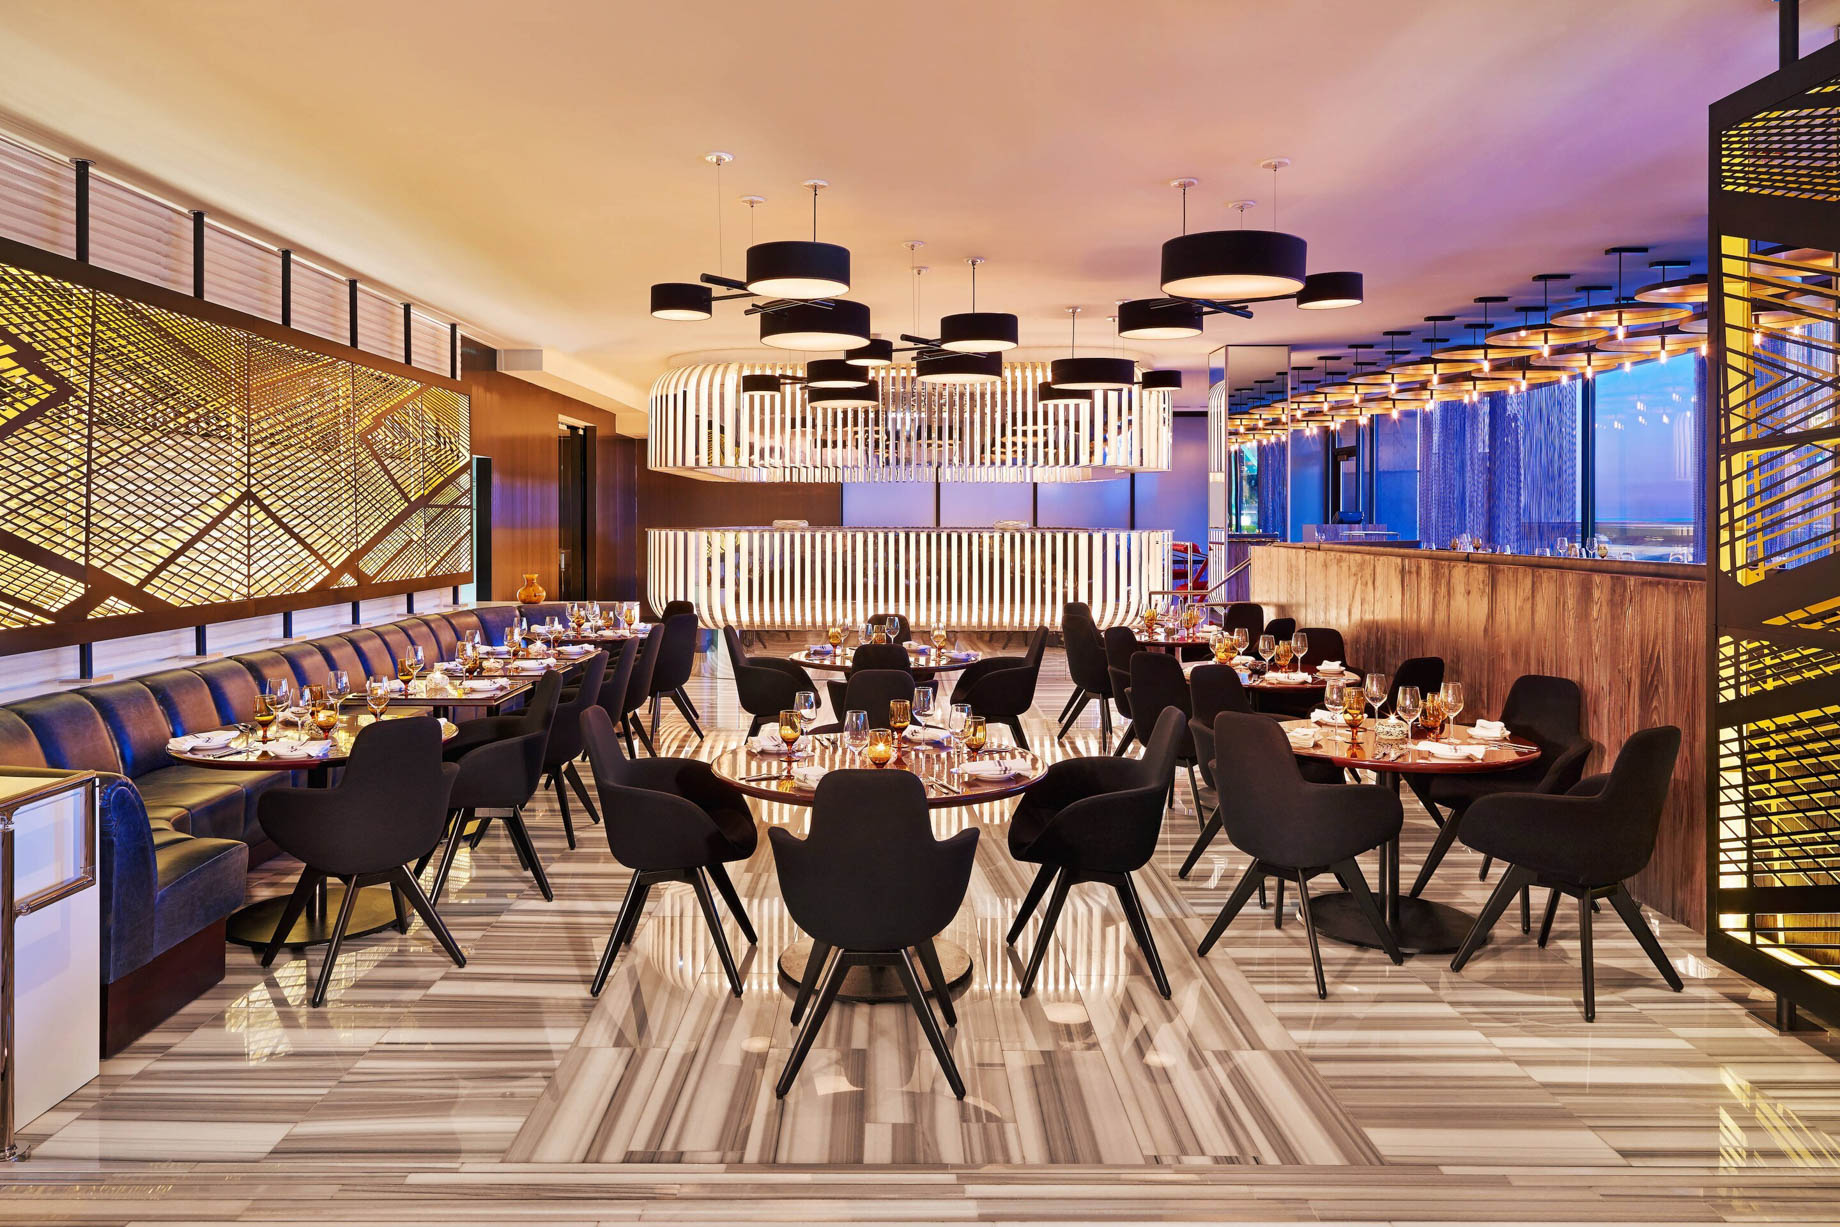 W Chicago Lakeshore Hotel – Chicago, IL, USA – CURRENT Restaurant Seating